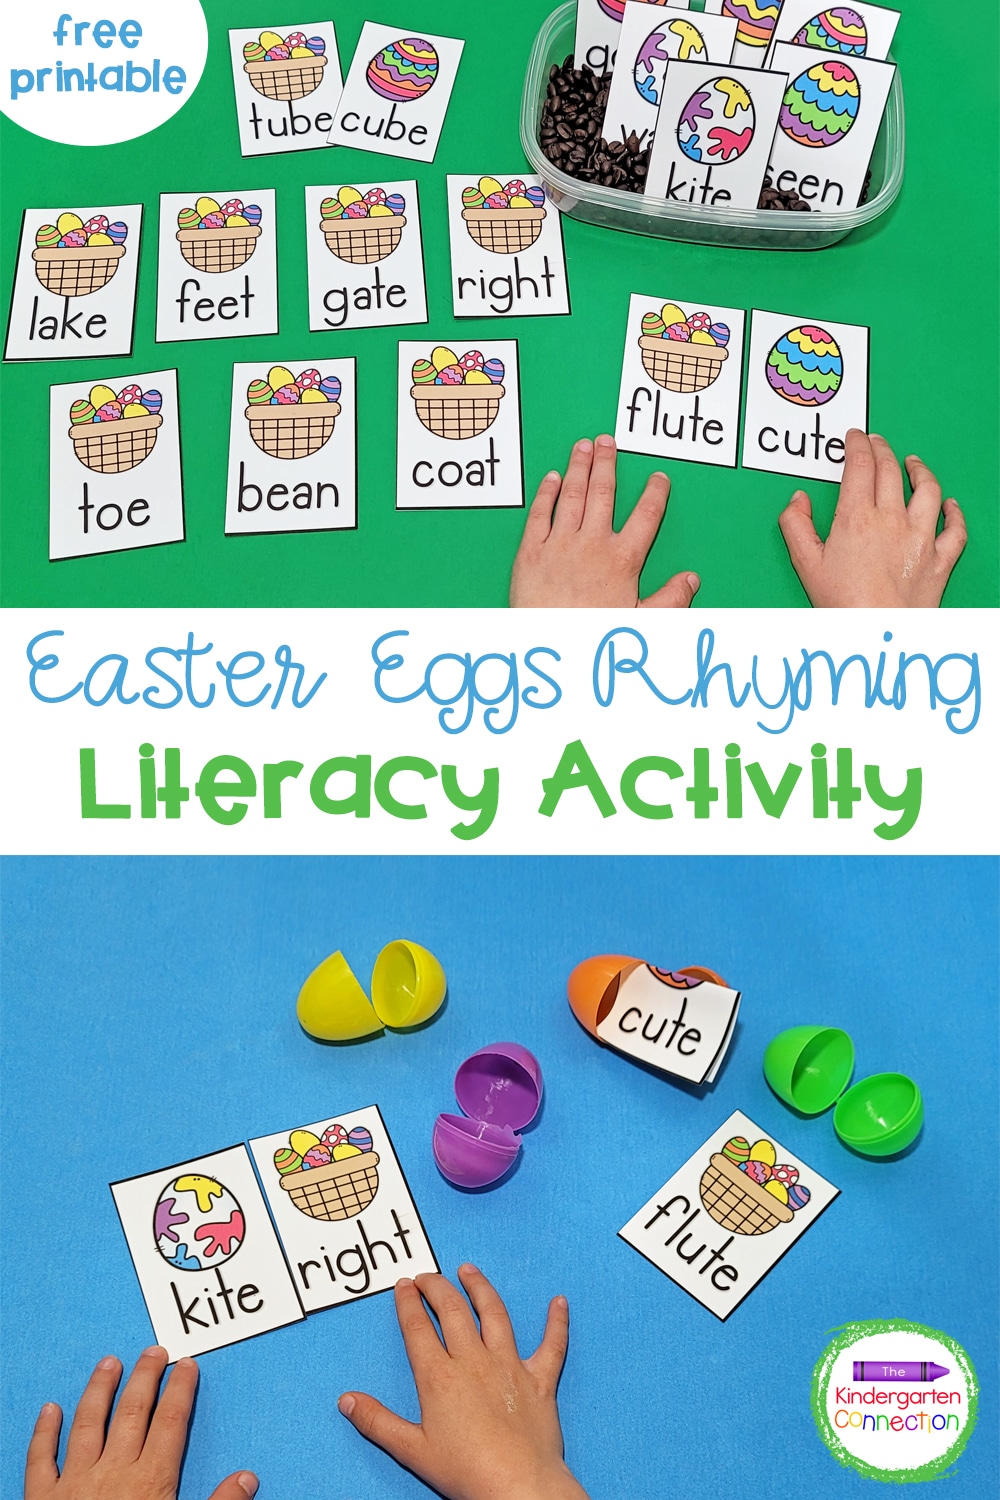 Grab this free Easter Egg Rhyming Activity and add some hands-on learning fun to your Kindergarten small groups or literacy centers!